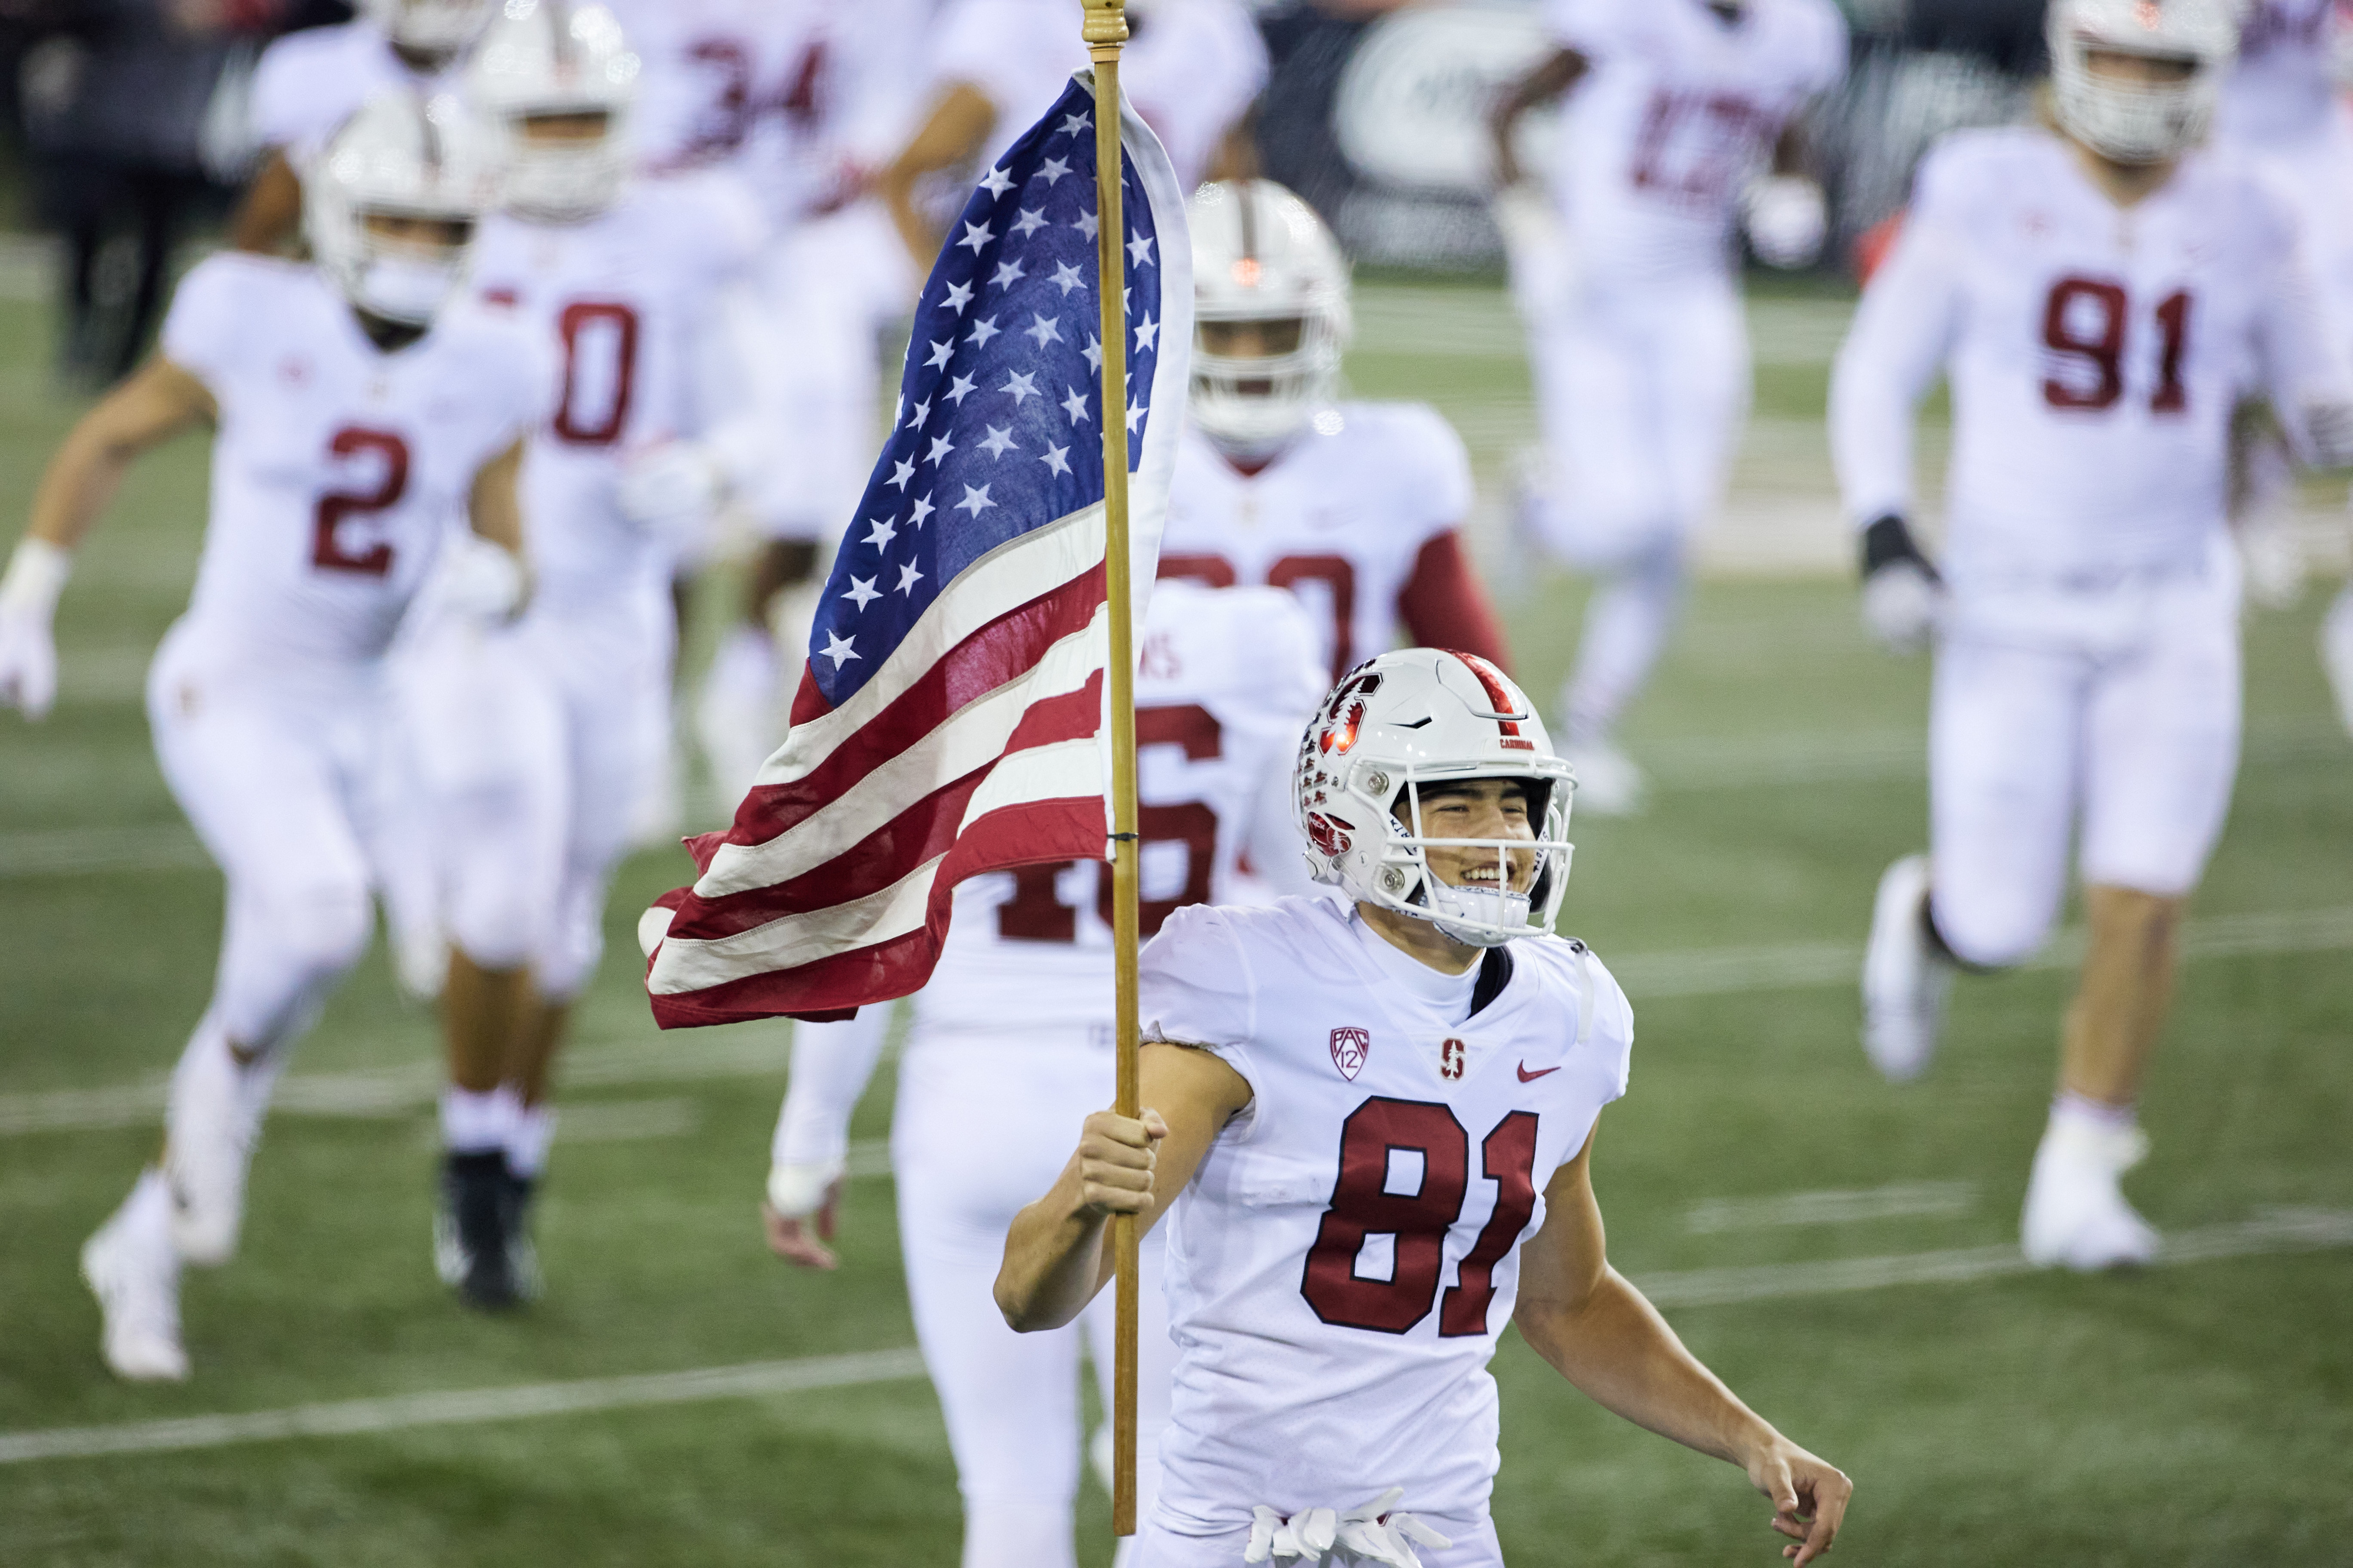 20 join Stanford Football in 2021 recruiting class